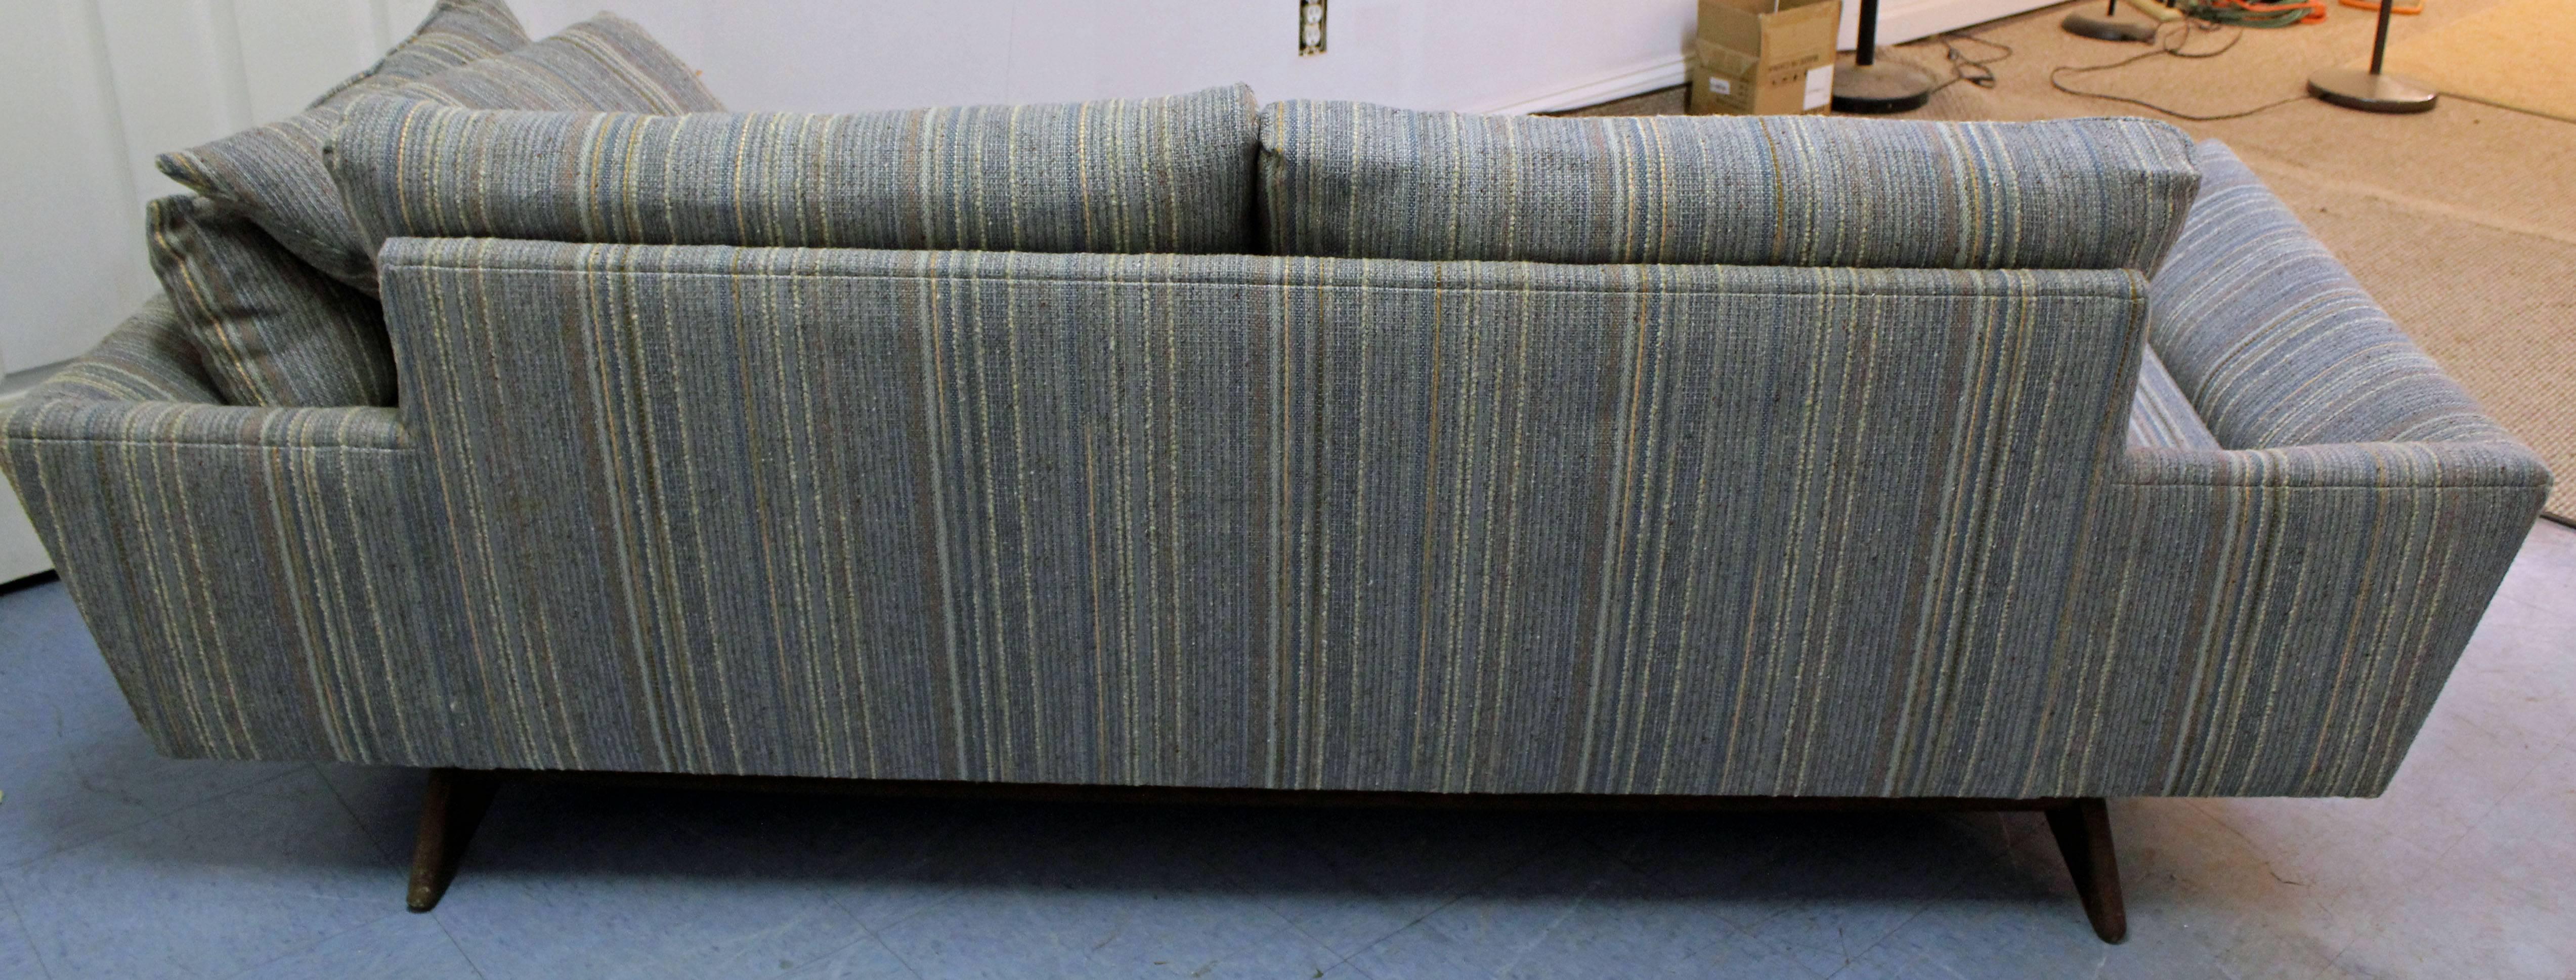 Upholstery Mid-Century Modern Adrian Pearsall for Craft Associates Sofa 2408